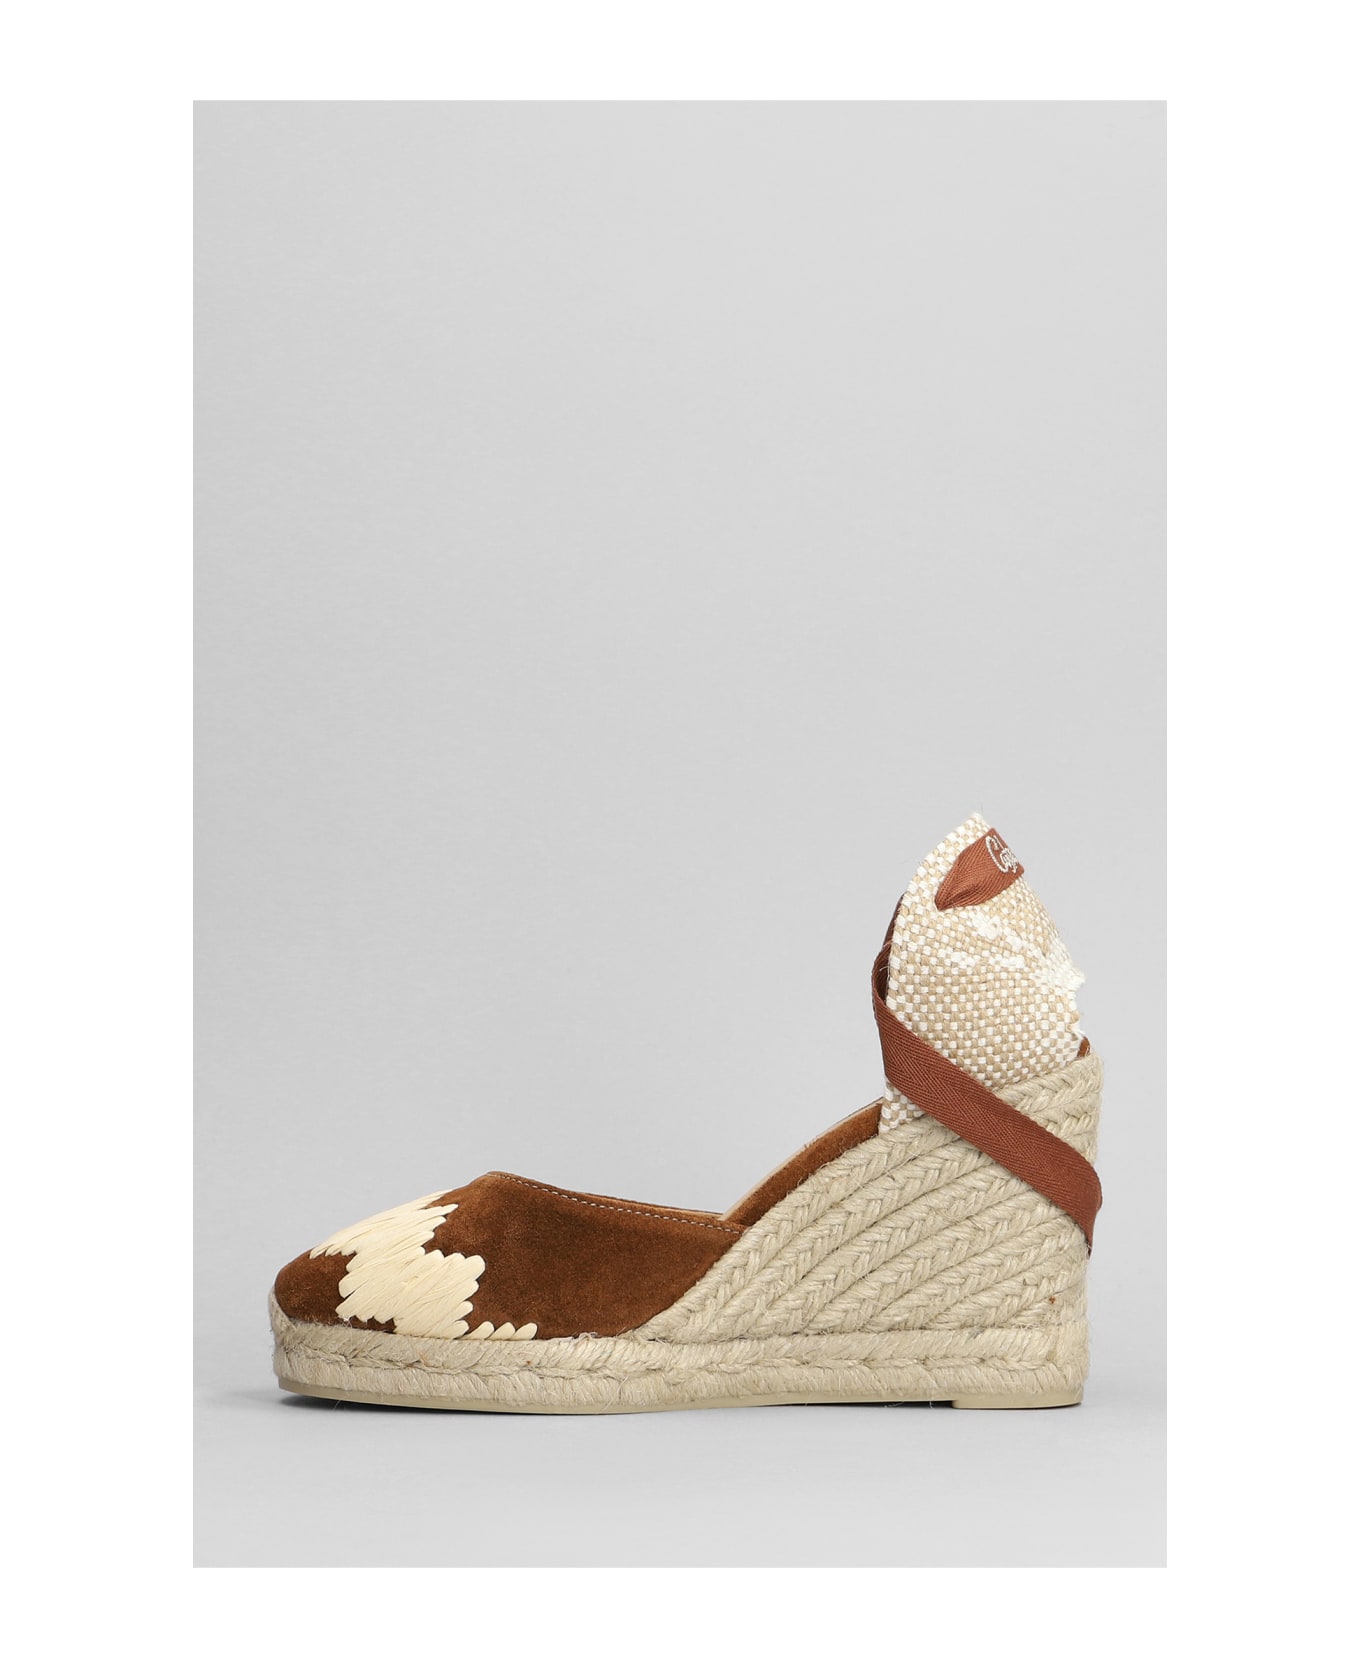 Castañer Cande-8-186 Wedges In Leather Color Suede - leather color